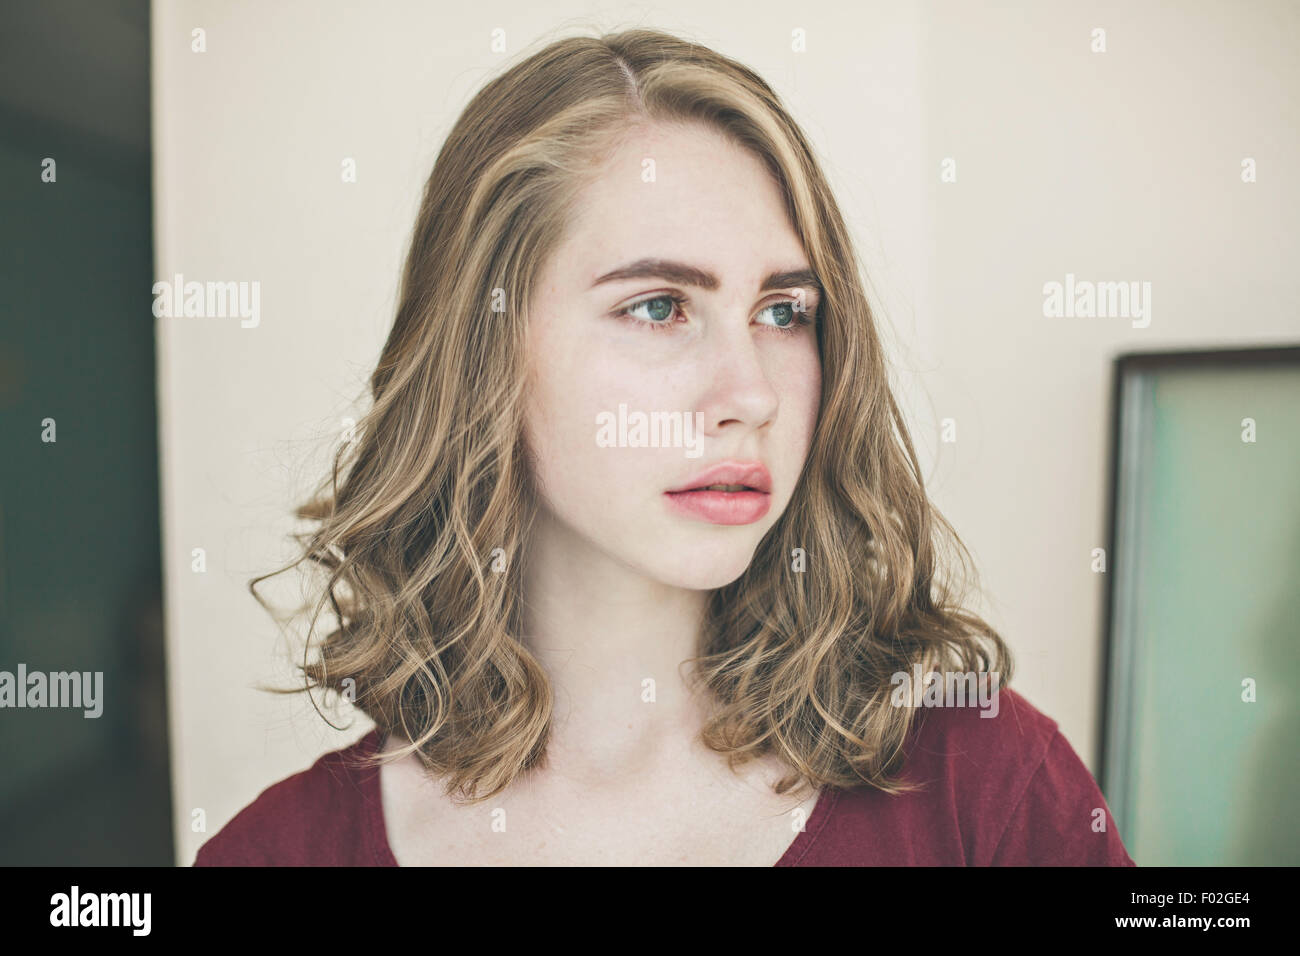 Portrait of a young woman looking sideways Stock Photo